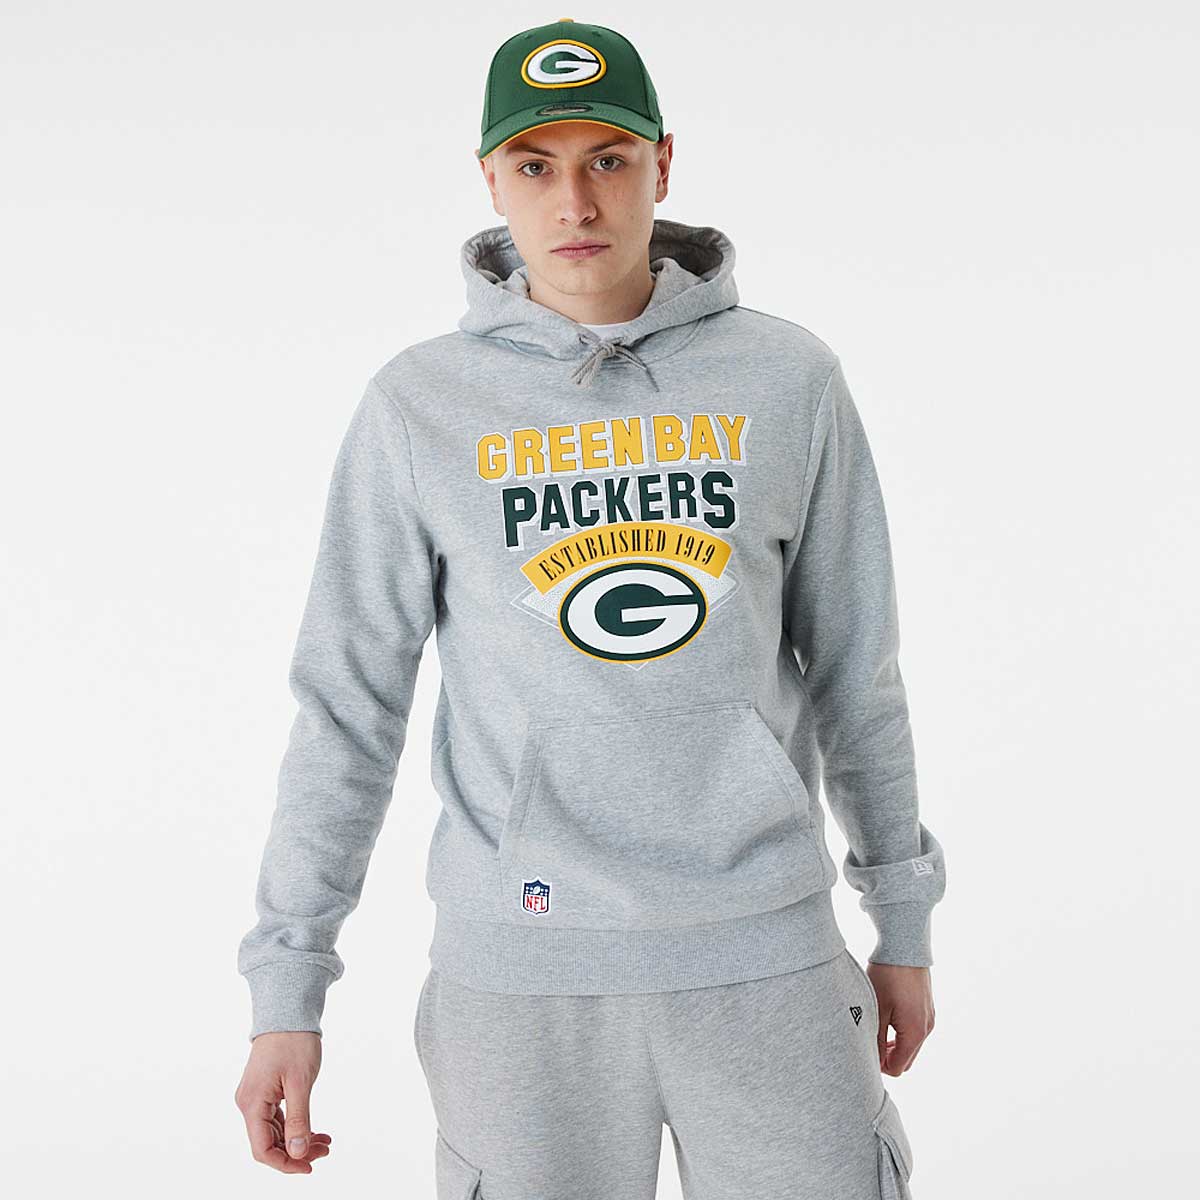 Image of New Era NFL Green Bay Packers Team Graphic Hoody, Grey